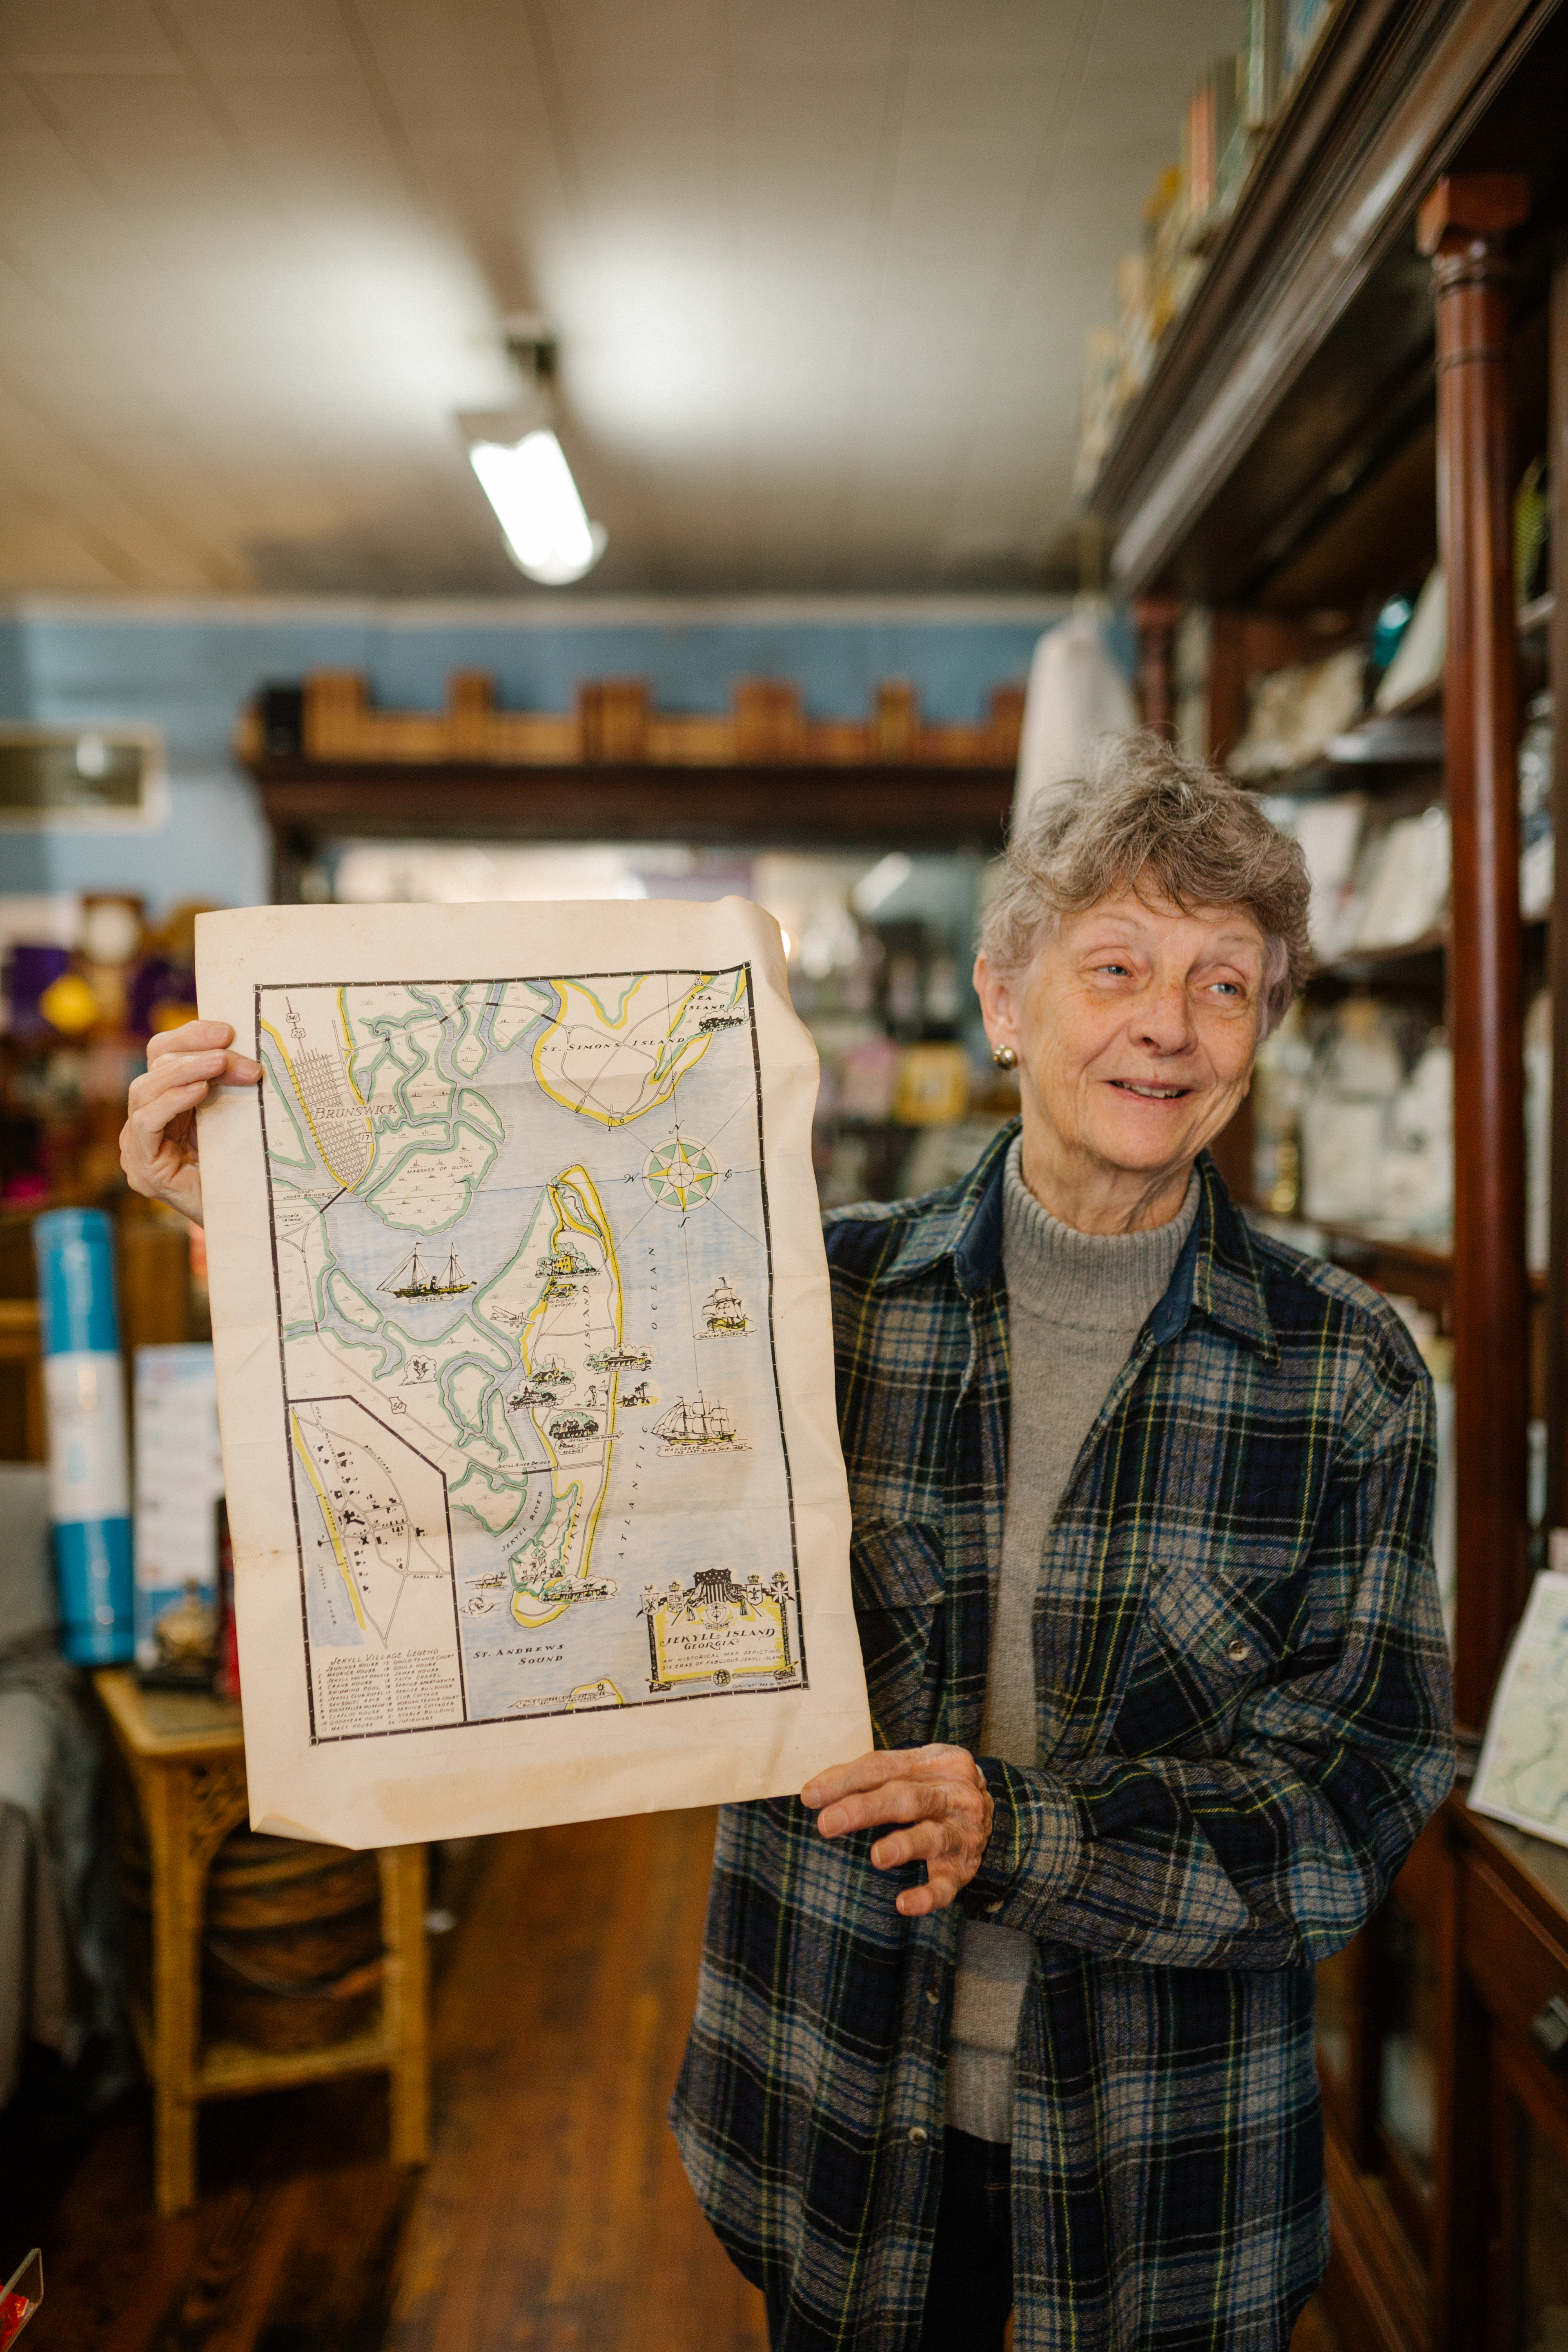 Shop keeper of Horton's Bookstore holding a map.